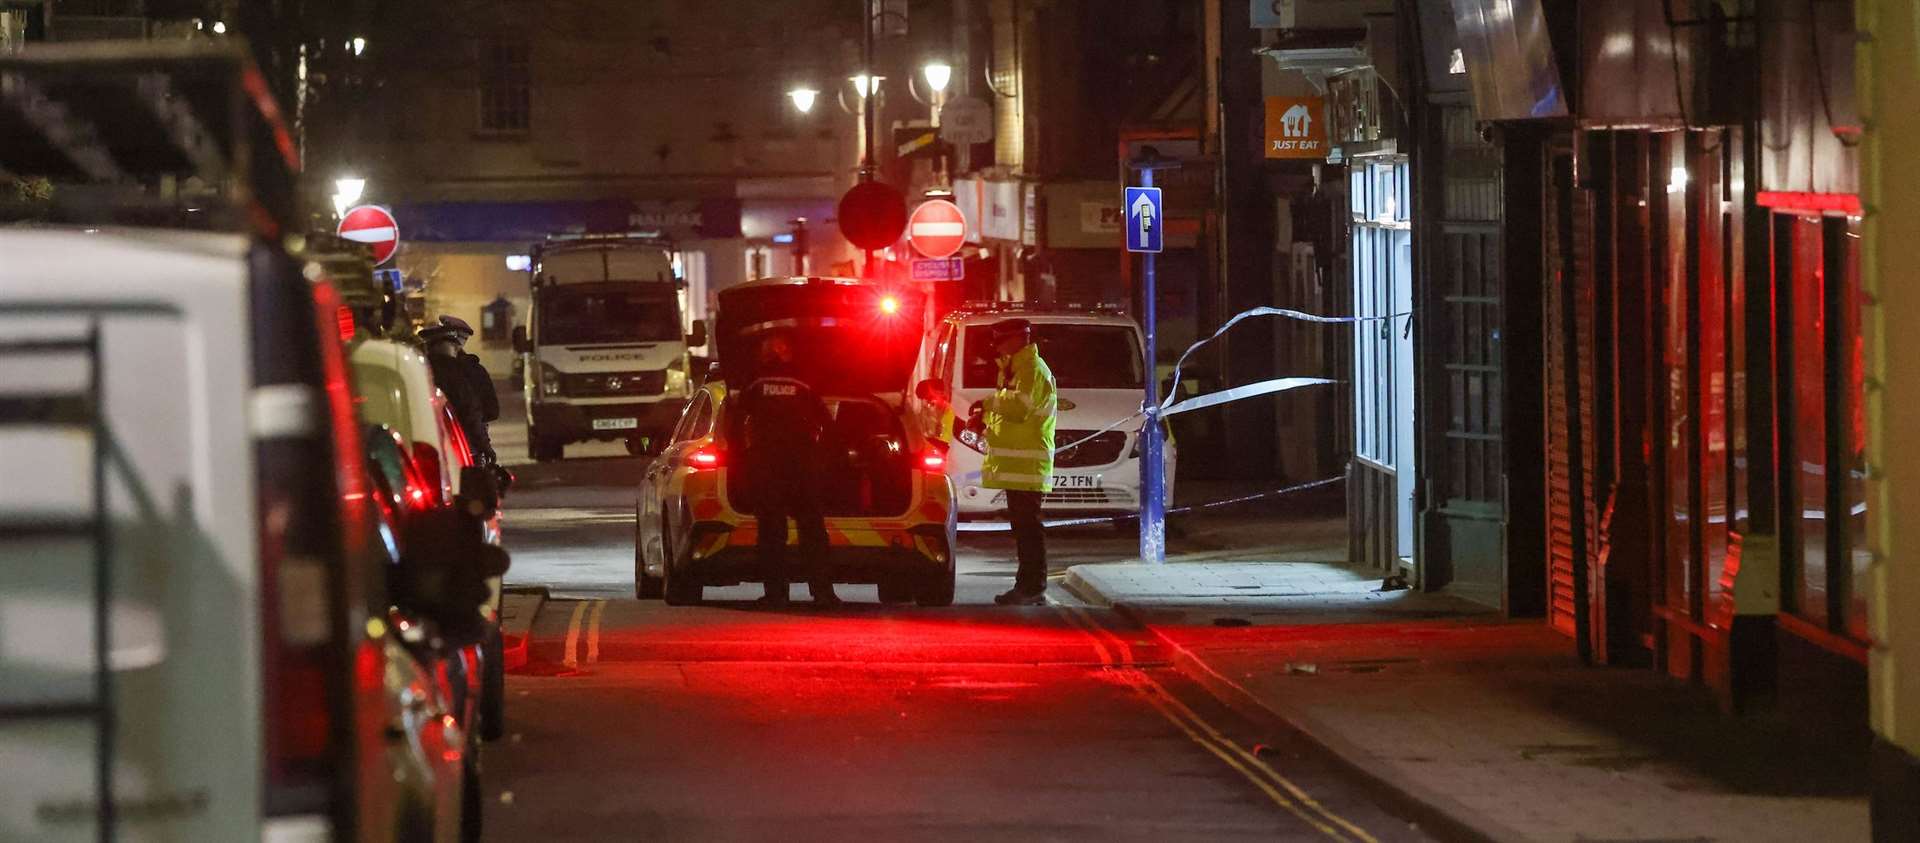 Emergency services at the scene of the suspected stabbing in King Street, Ramsgate. Picture: UKNIP